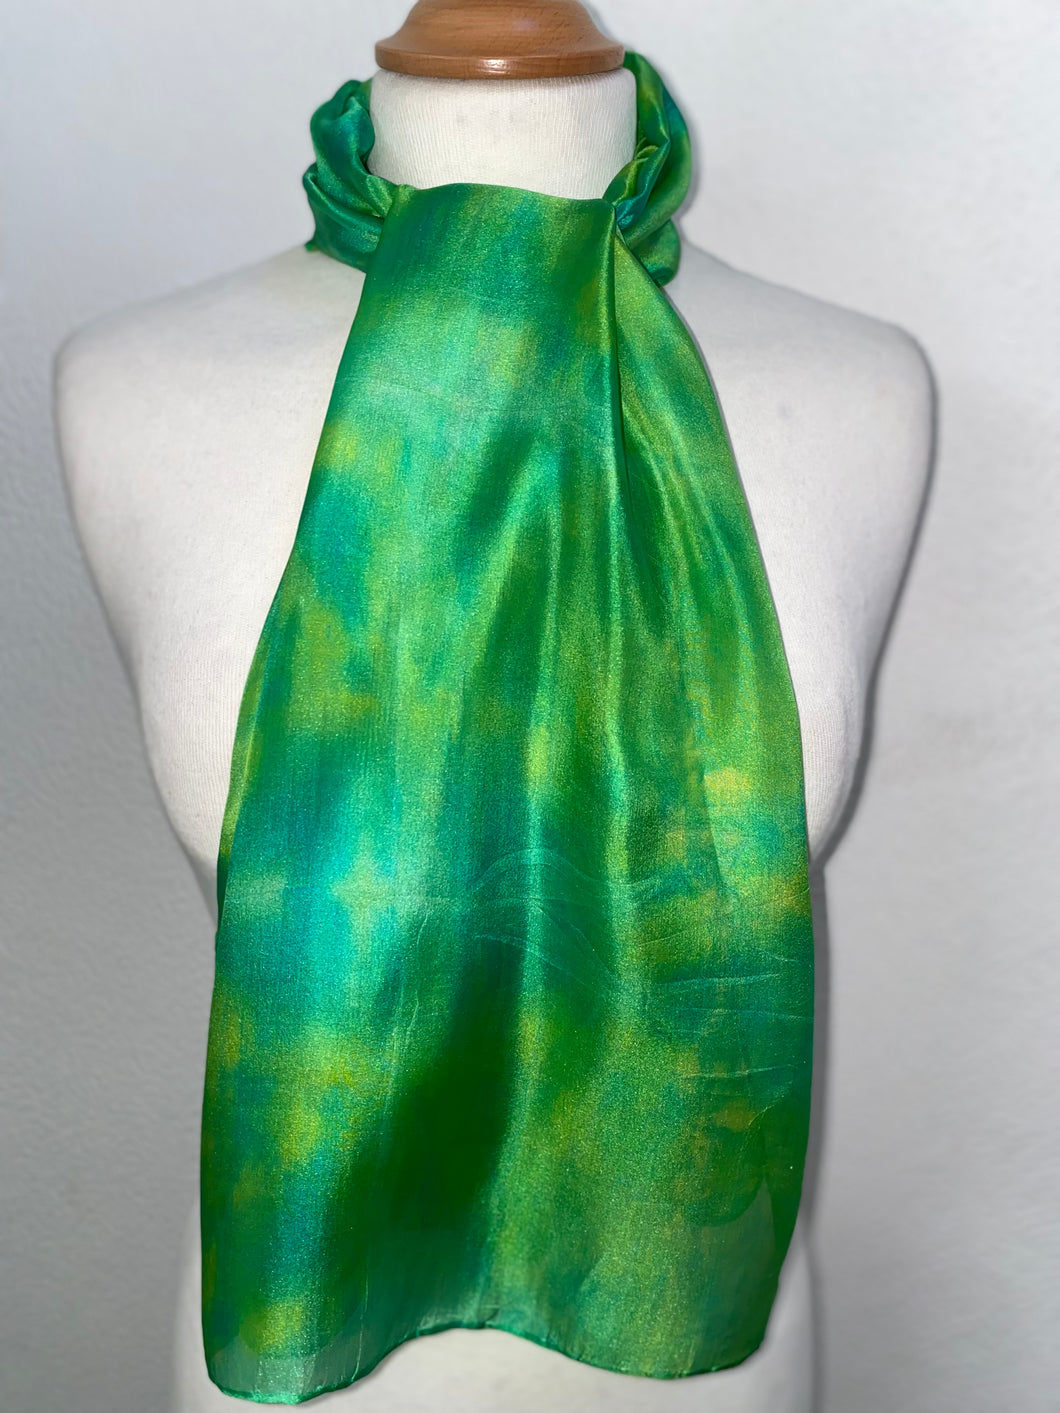 Hand Dyed Silk Neck Scarf in Greens